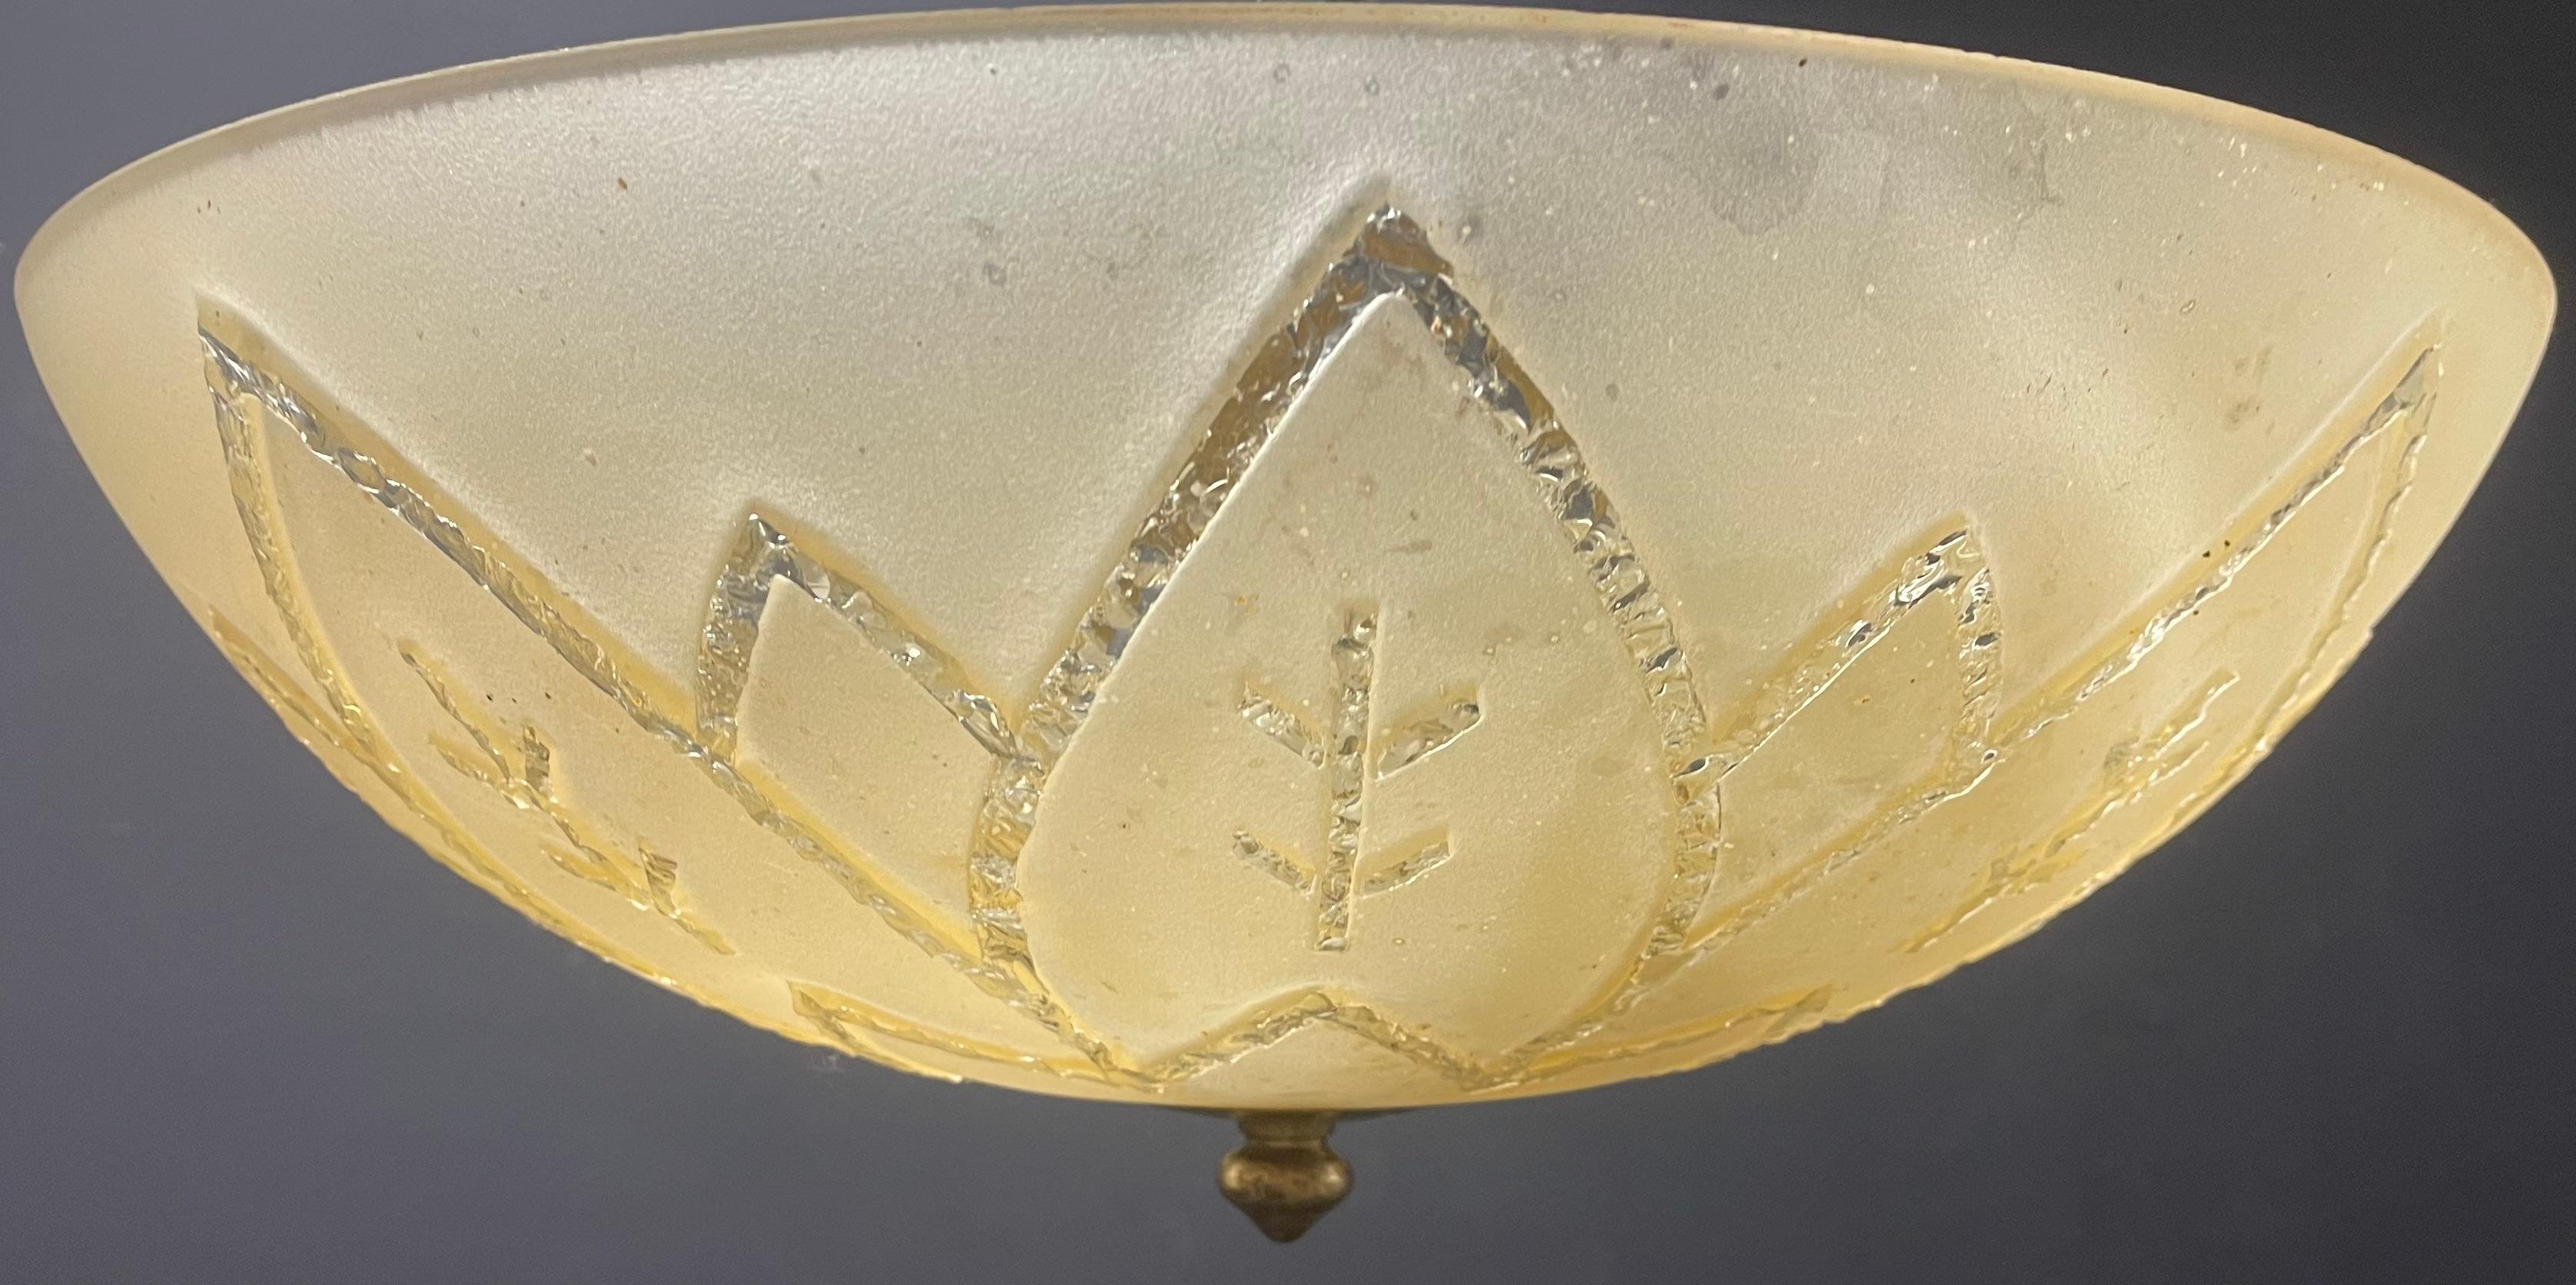 nice ceiling lamp with carved and sanded details.